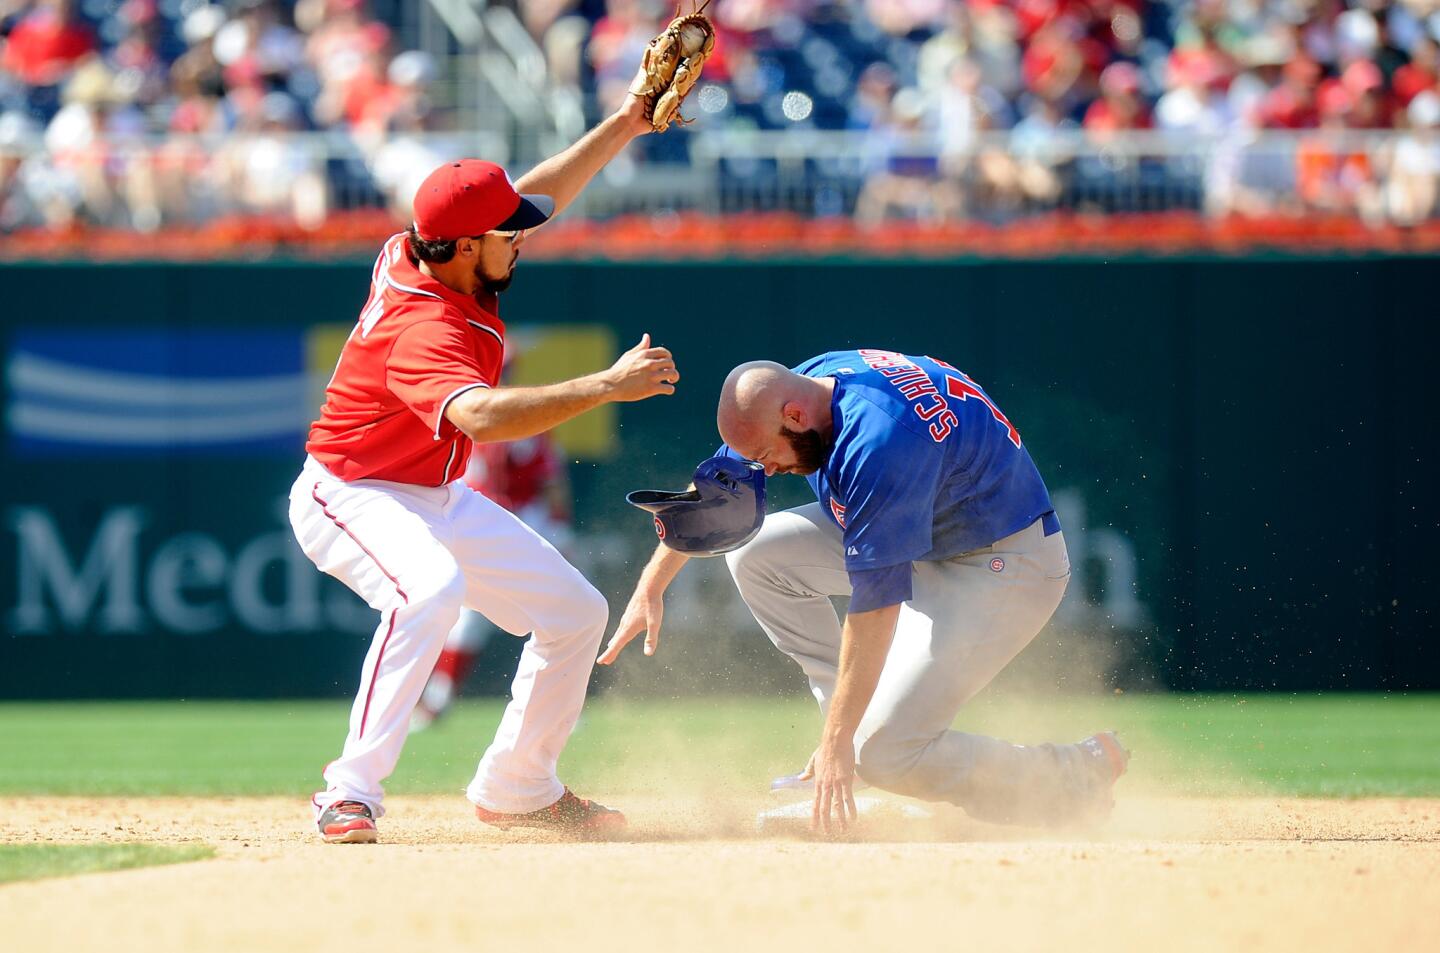 Nate Schierholtz steals second base in the eighth inning ahead of the tag of the Nationals' Anthony Rendon.